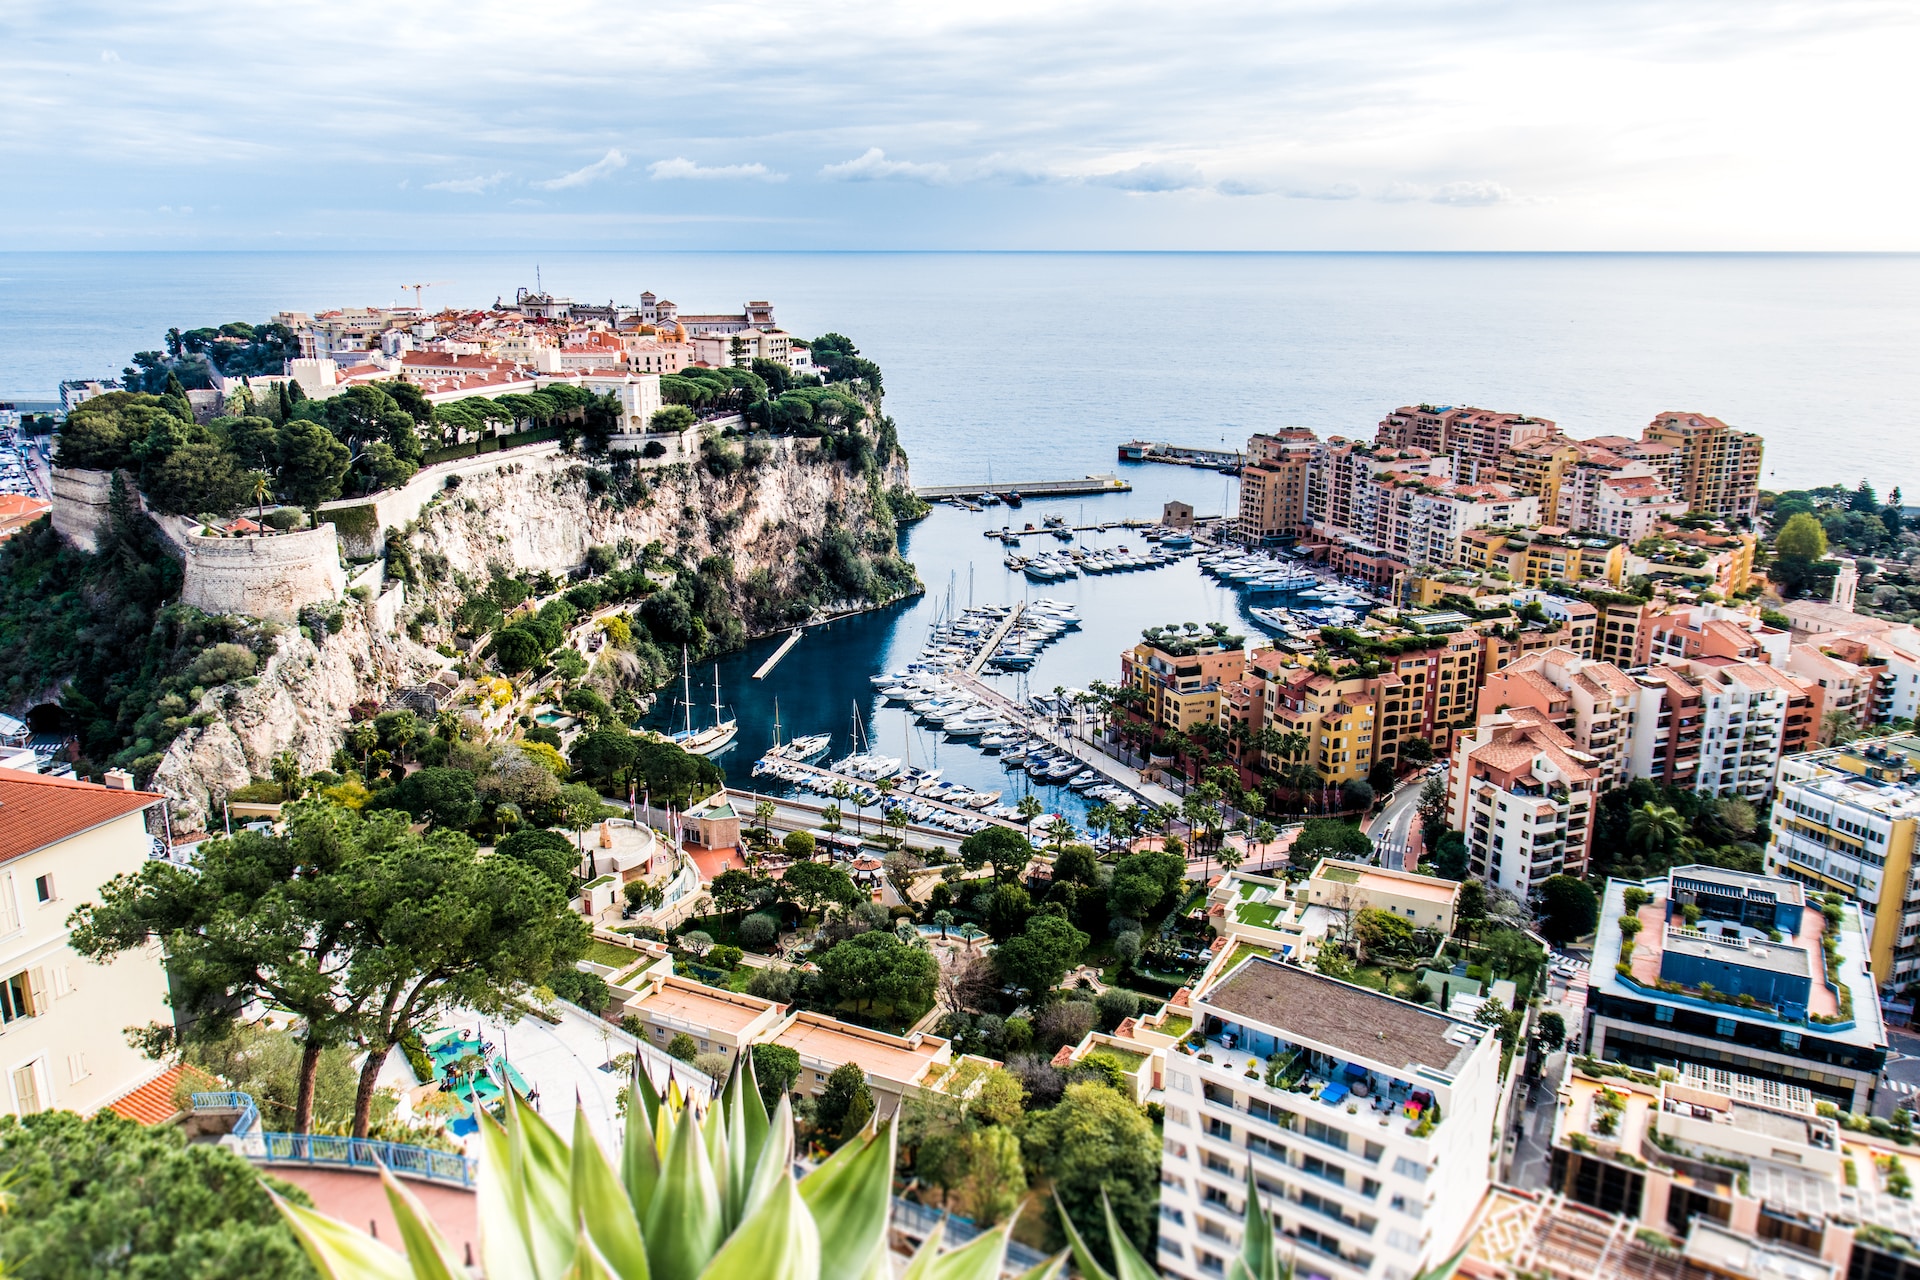 Views of the exquisite bay from the Exotic Garden of Monaco.